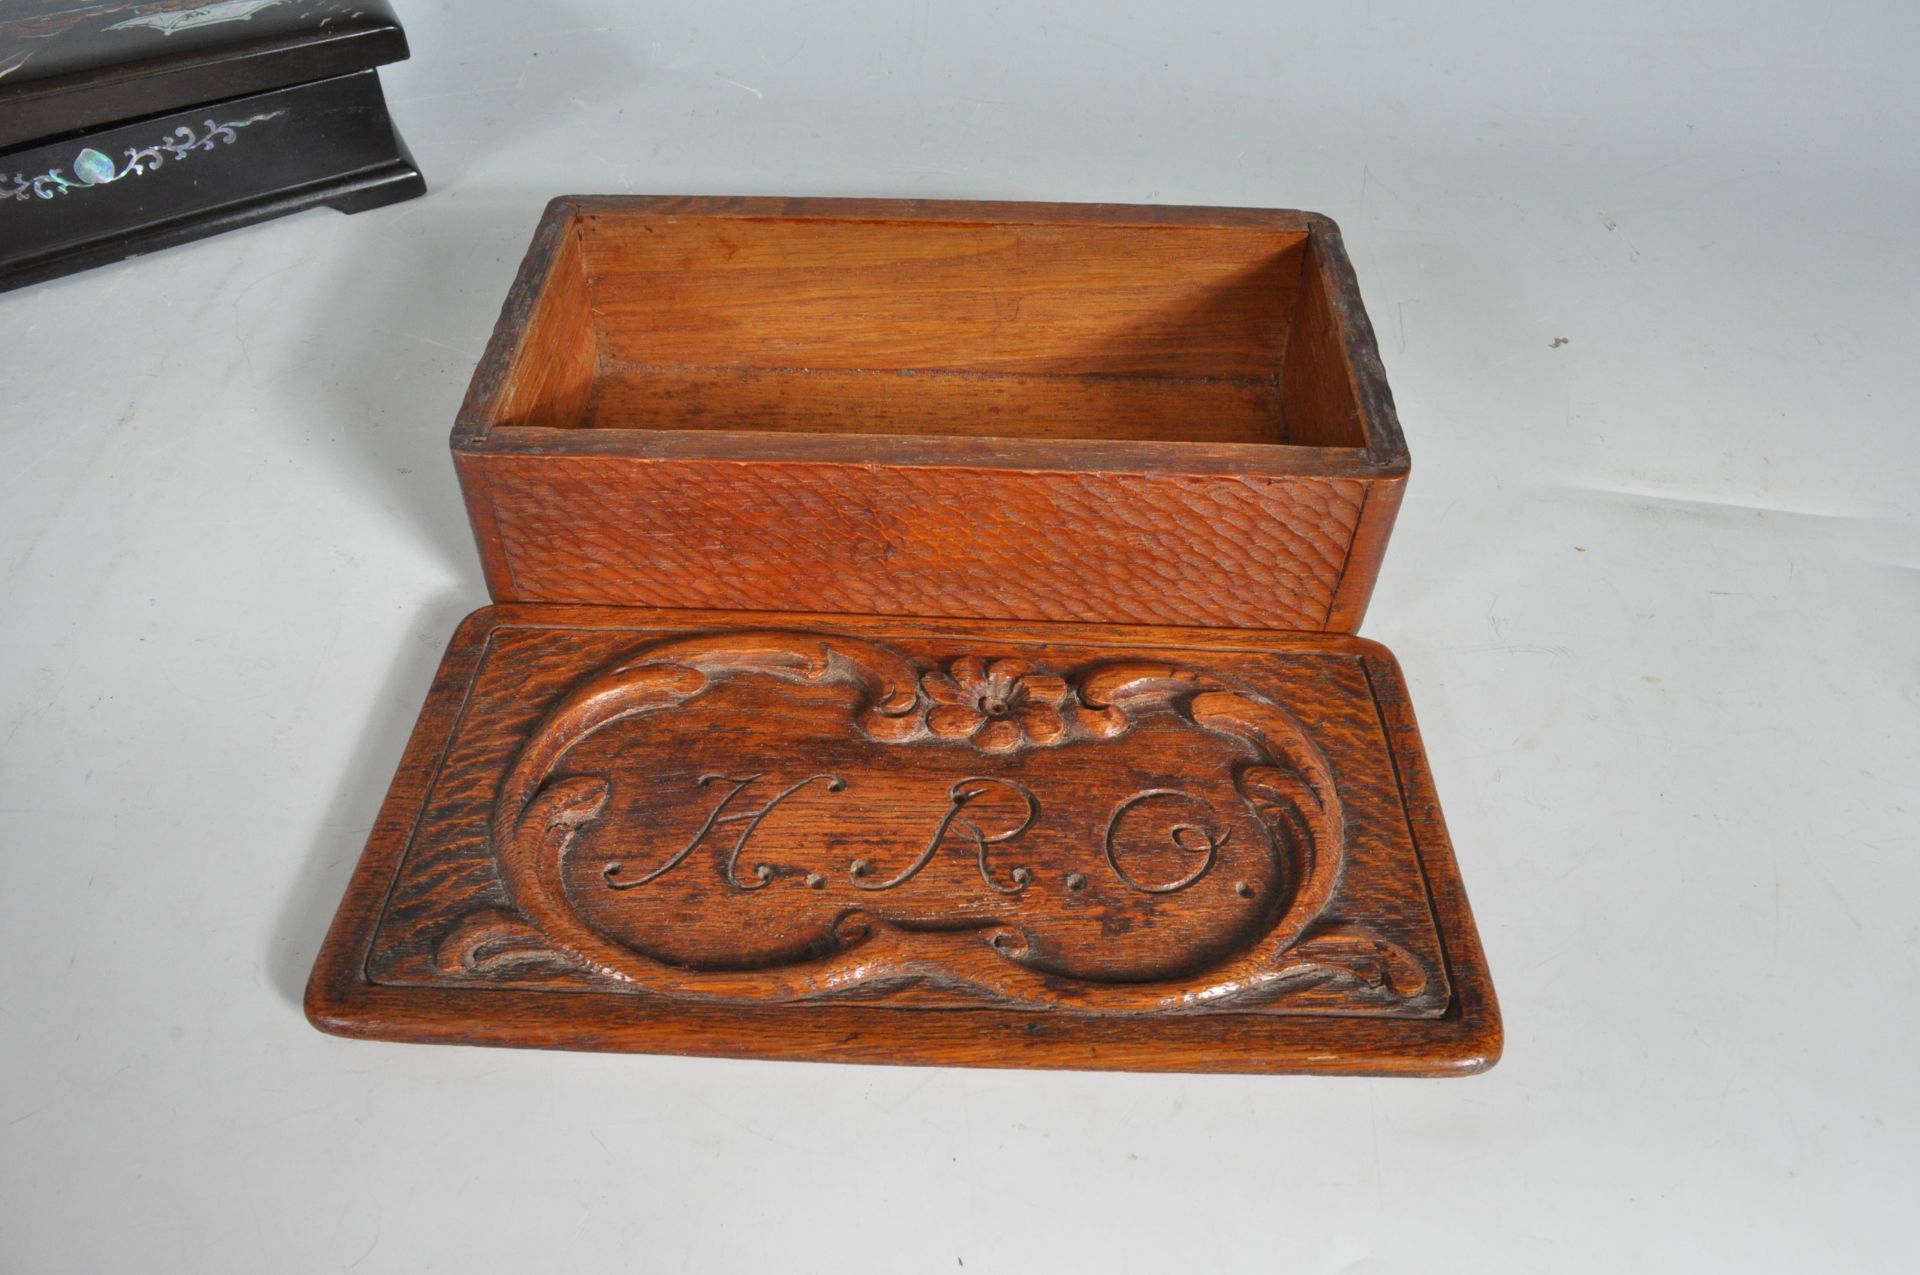 COLLECTION OF 20TH CENTURY VINTAGE BOXES. - Image 8 of 8